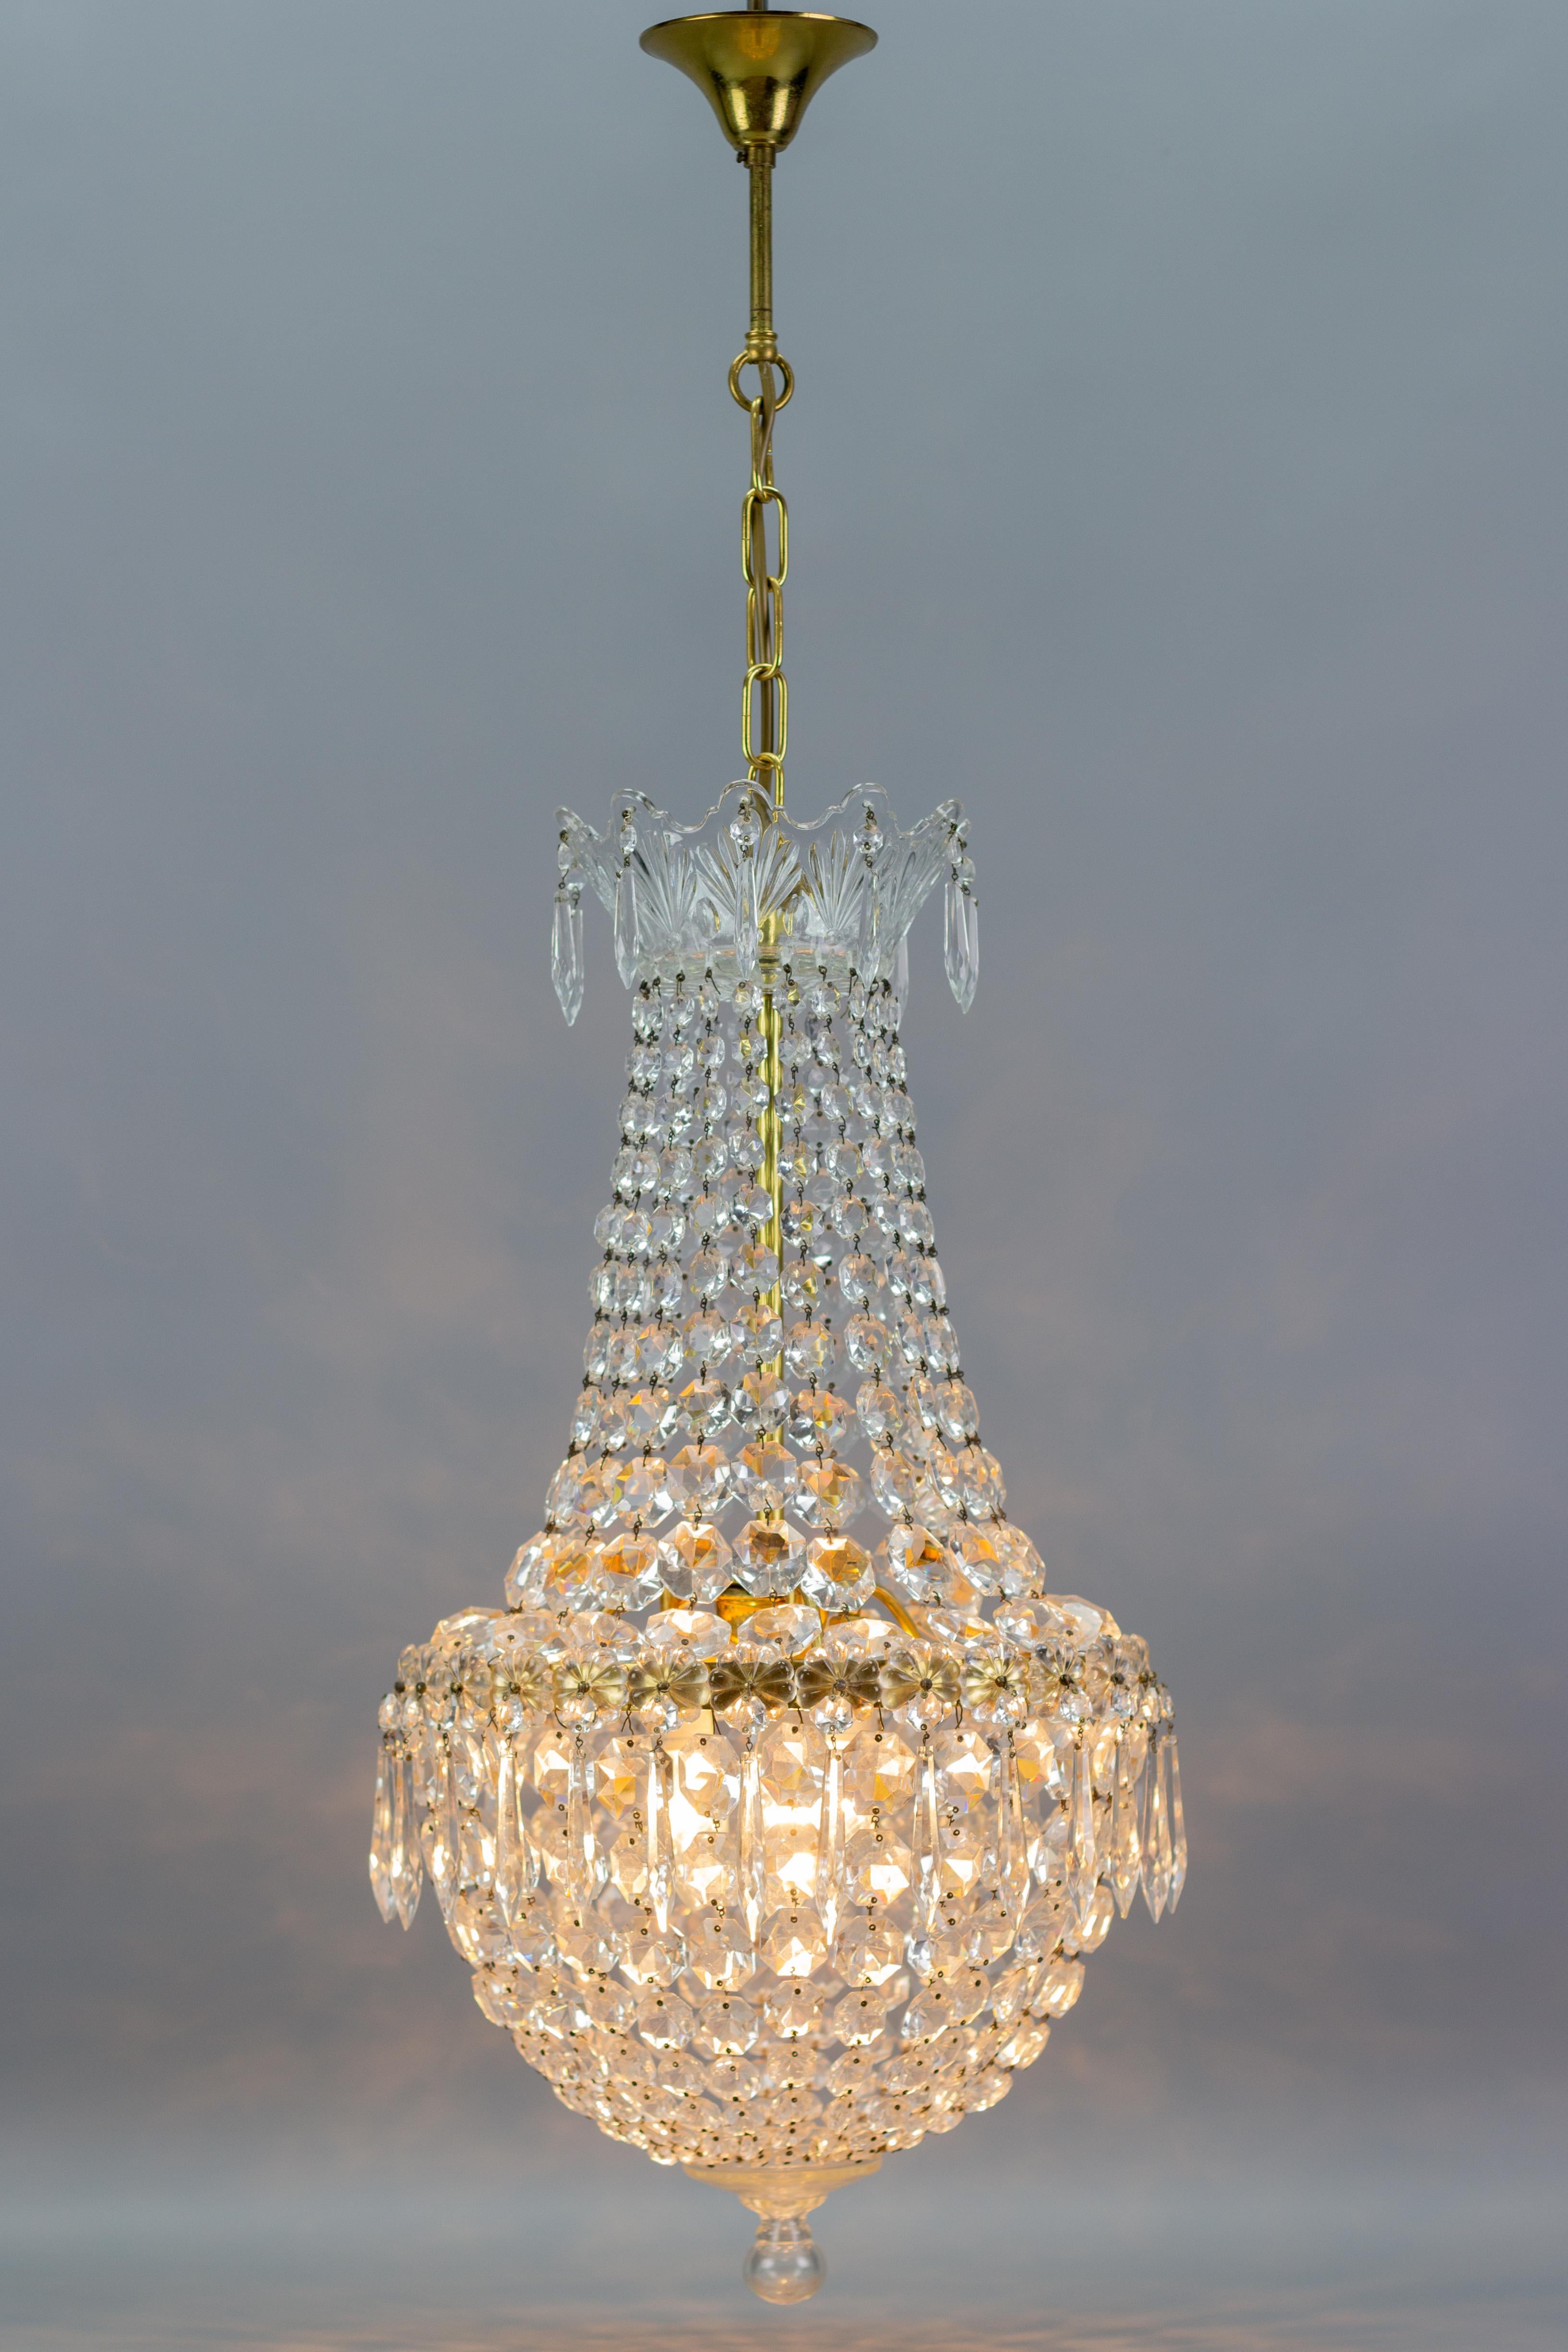 Hollywood Regency French Crystal Glass and Brass Three-Light Basket Chandelier